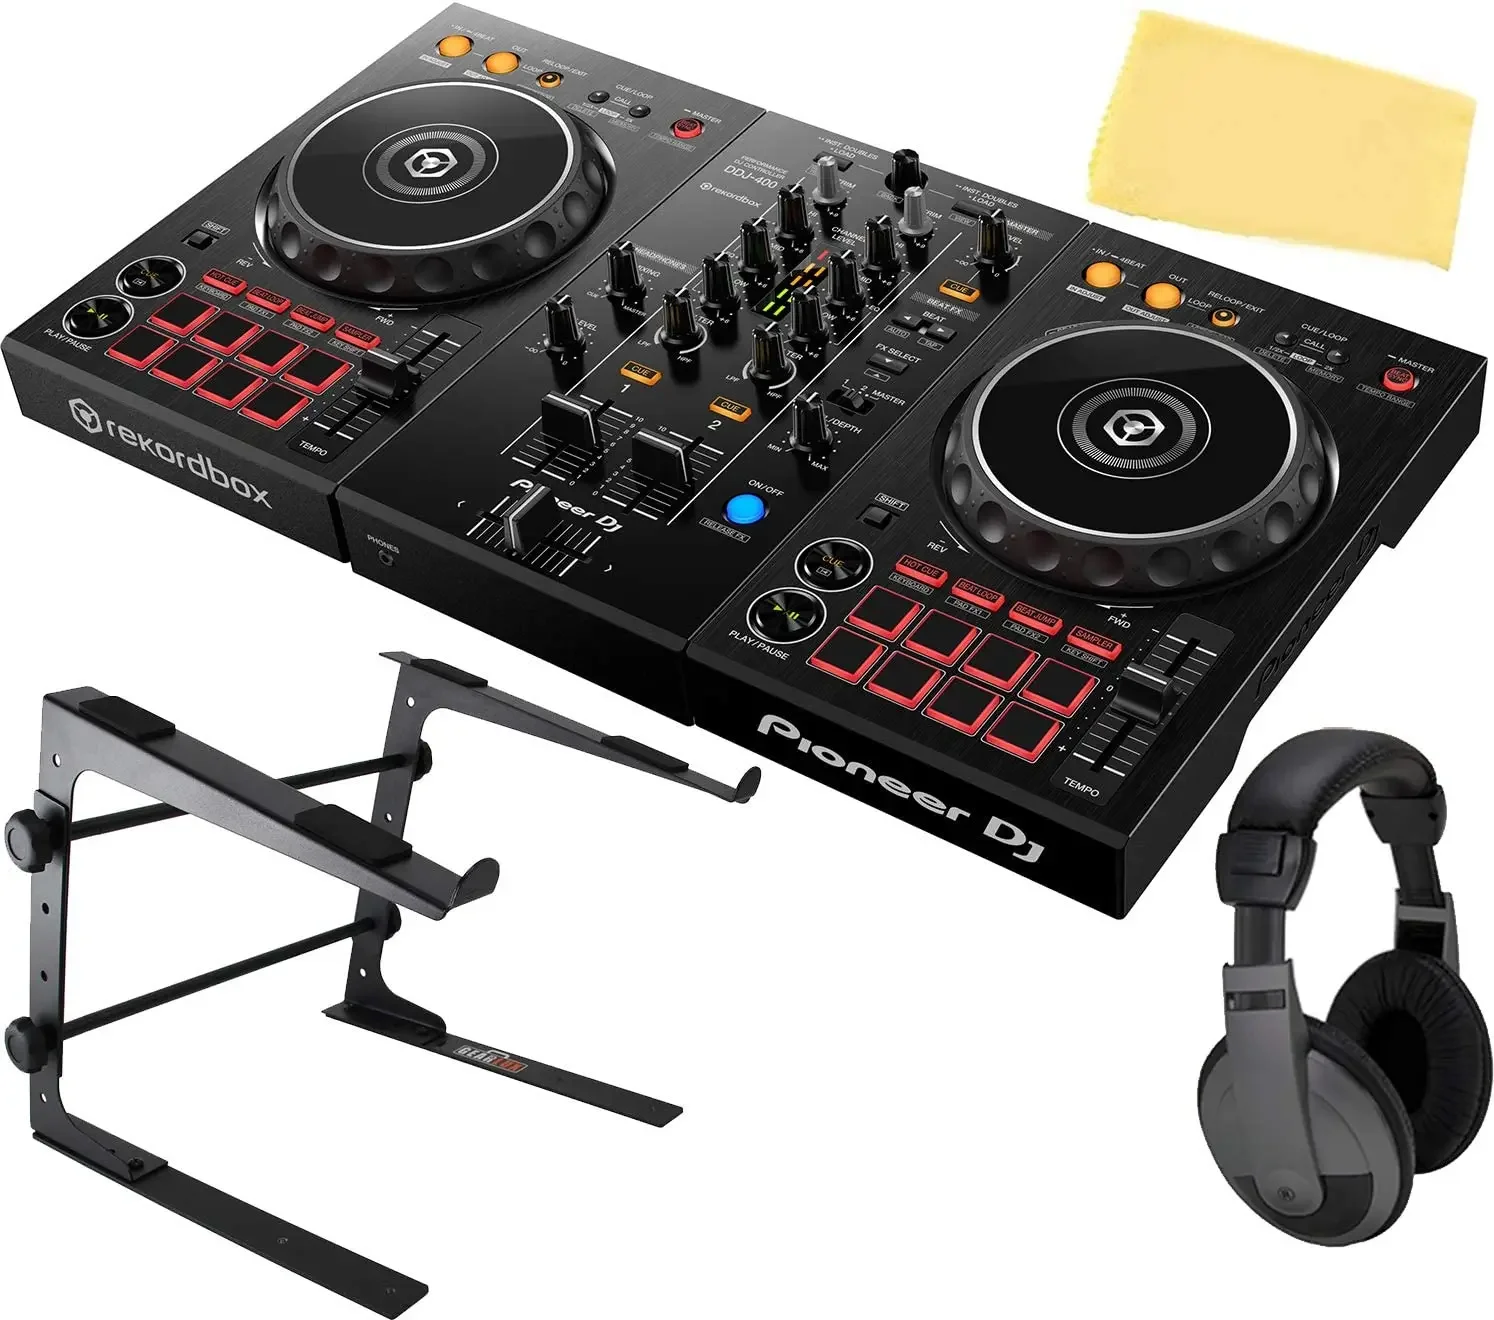 

SPRING SALES DISCOUNT ON 100% DISCOUNTED Pioneer DDJ 1000 4 Channel Rekordbox Dj Controller With Integrated Mixer Deluxe Offer